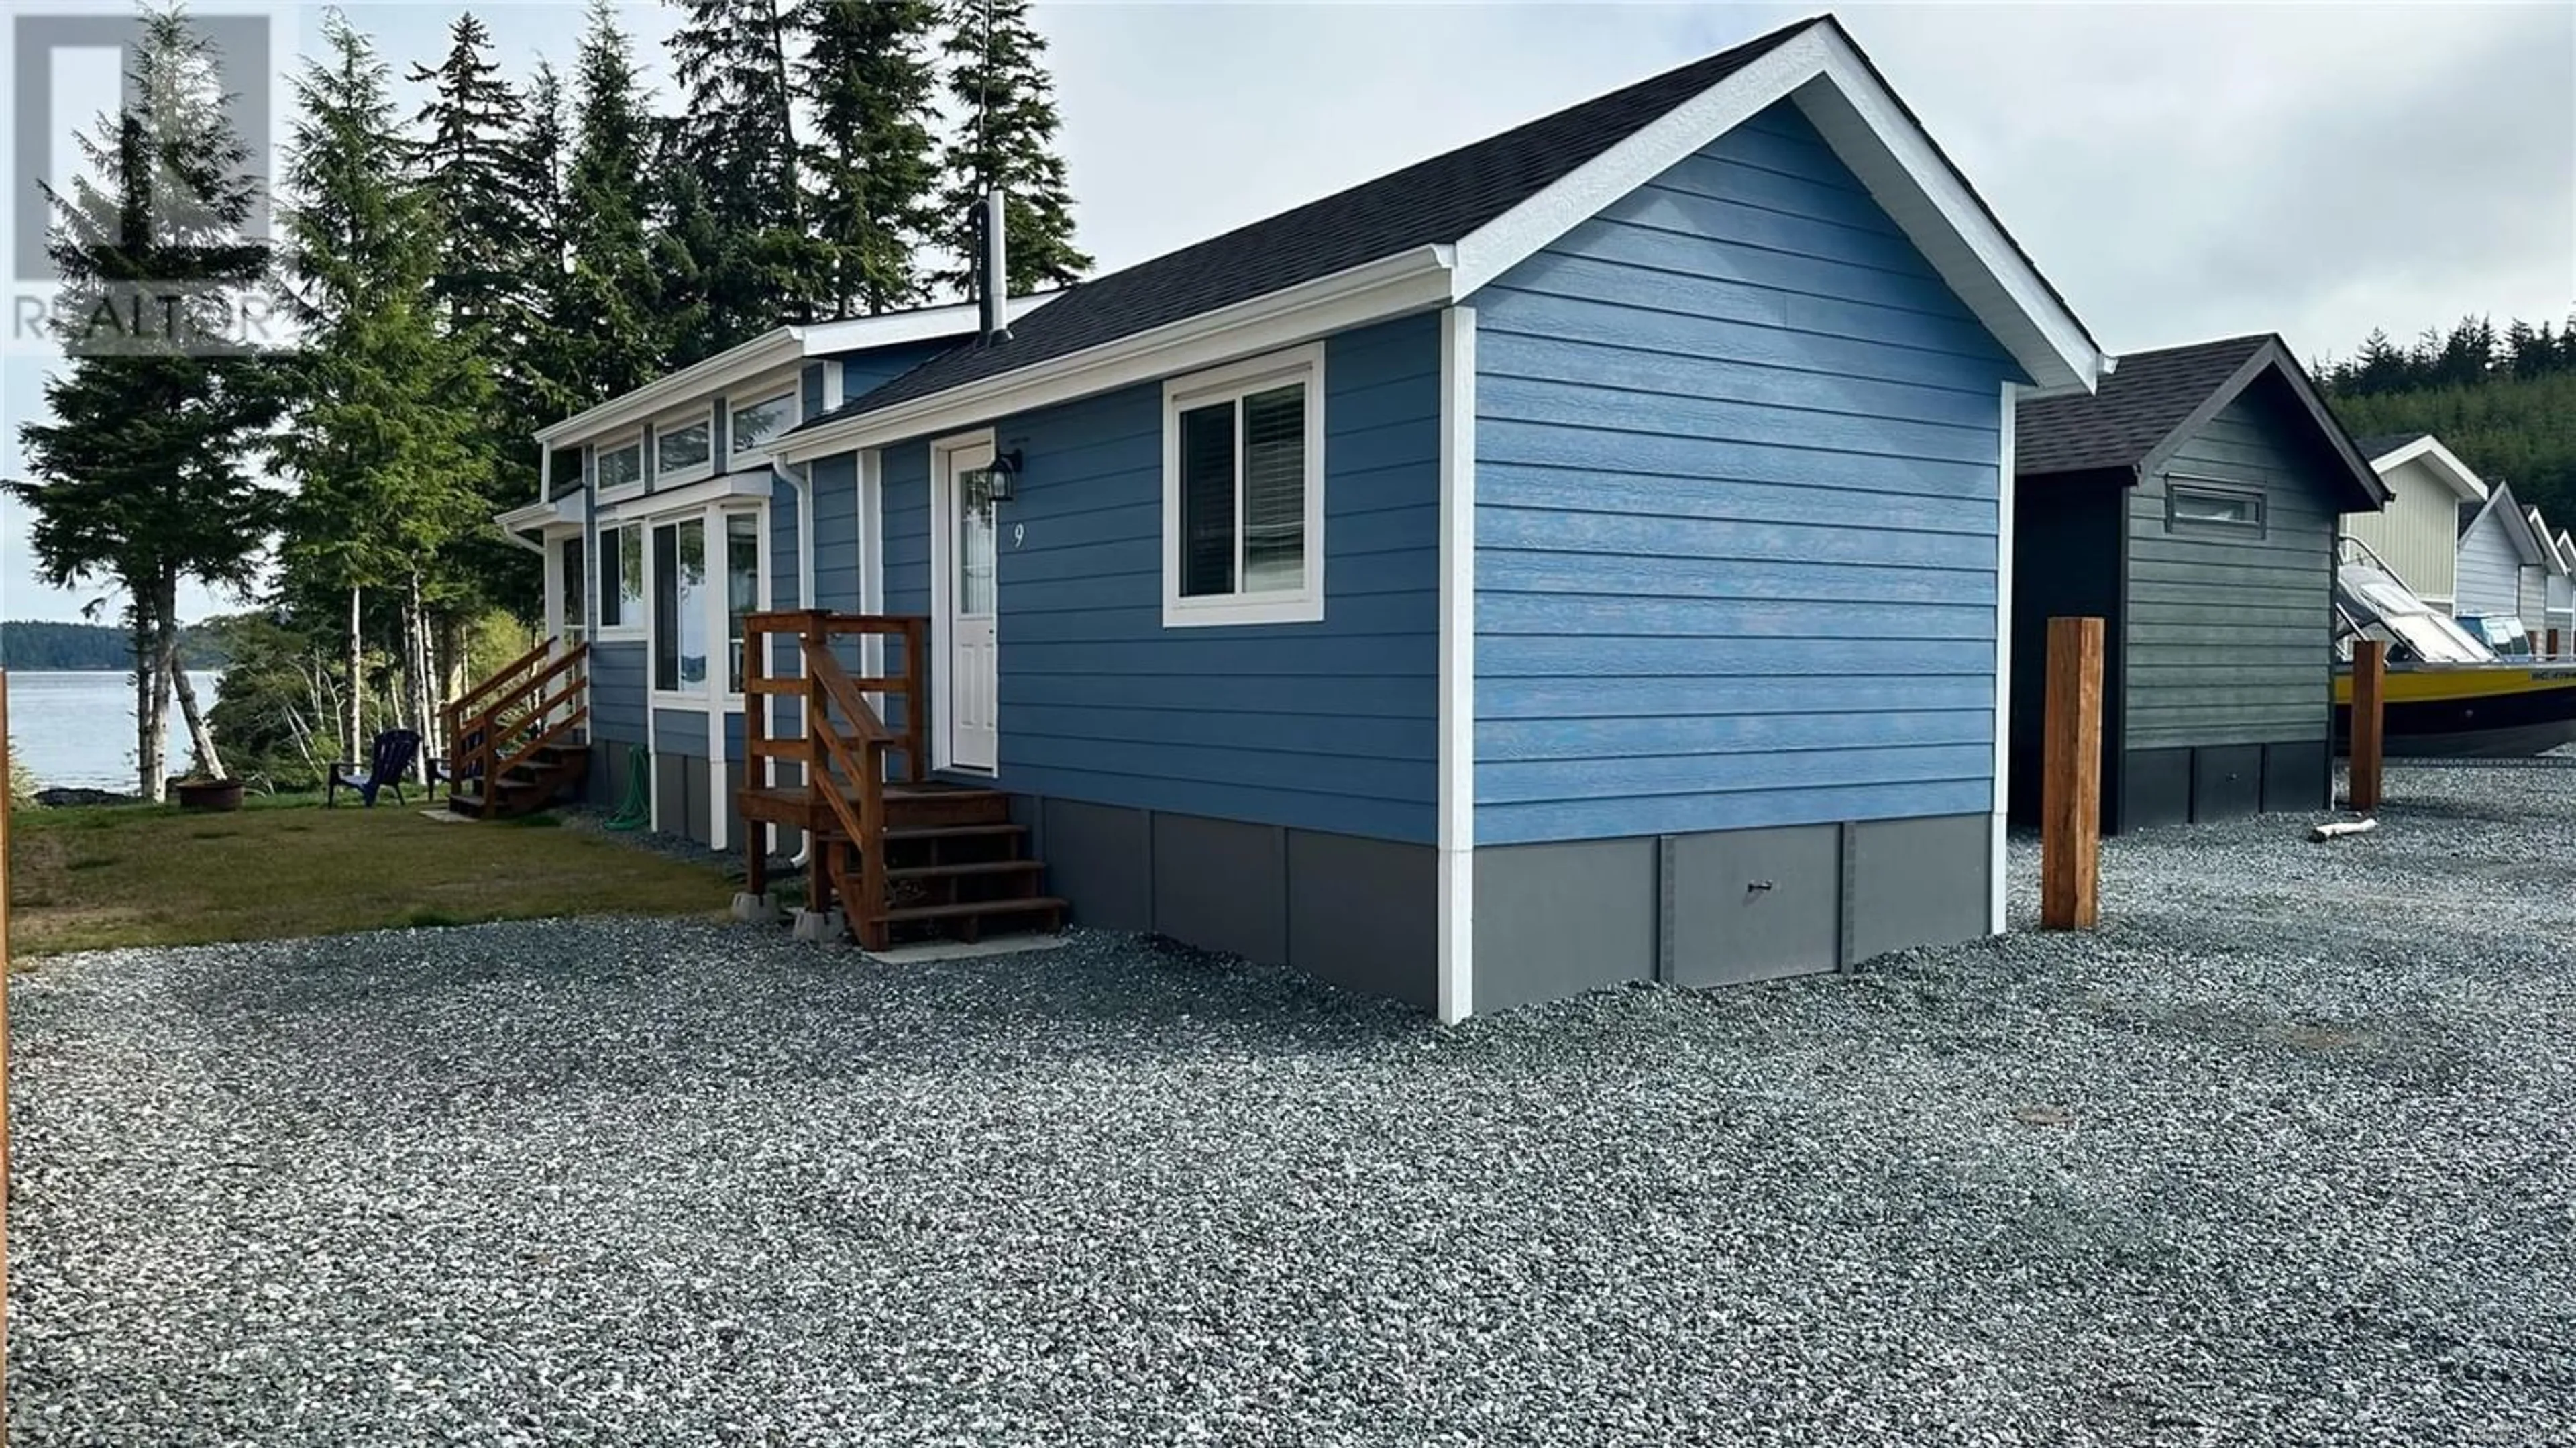 Home with vinyl exterior material for 9 1 Alder Bay Rd, Port McNeill British Columbia V0N2R0